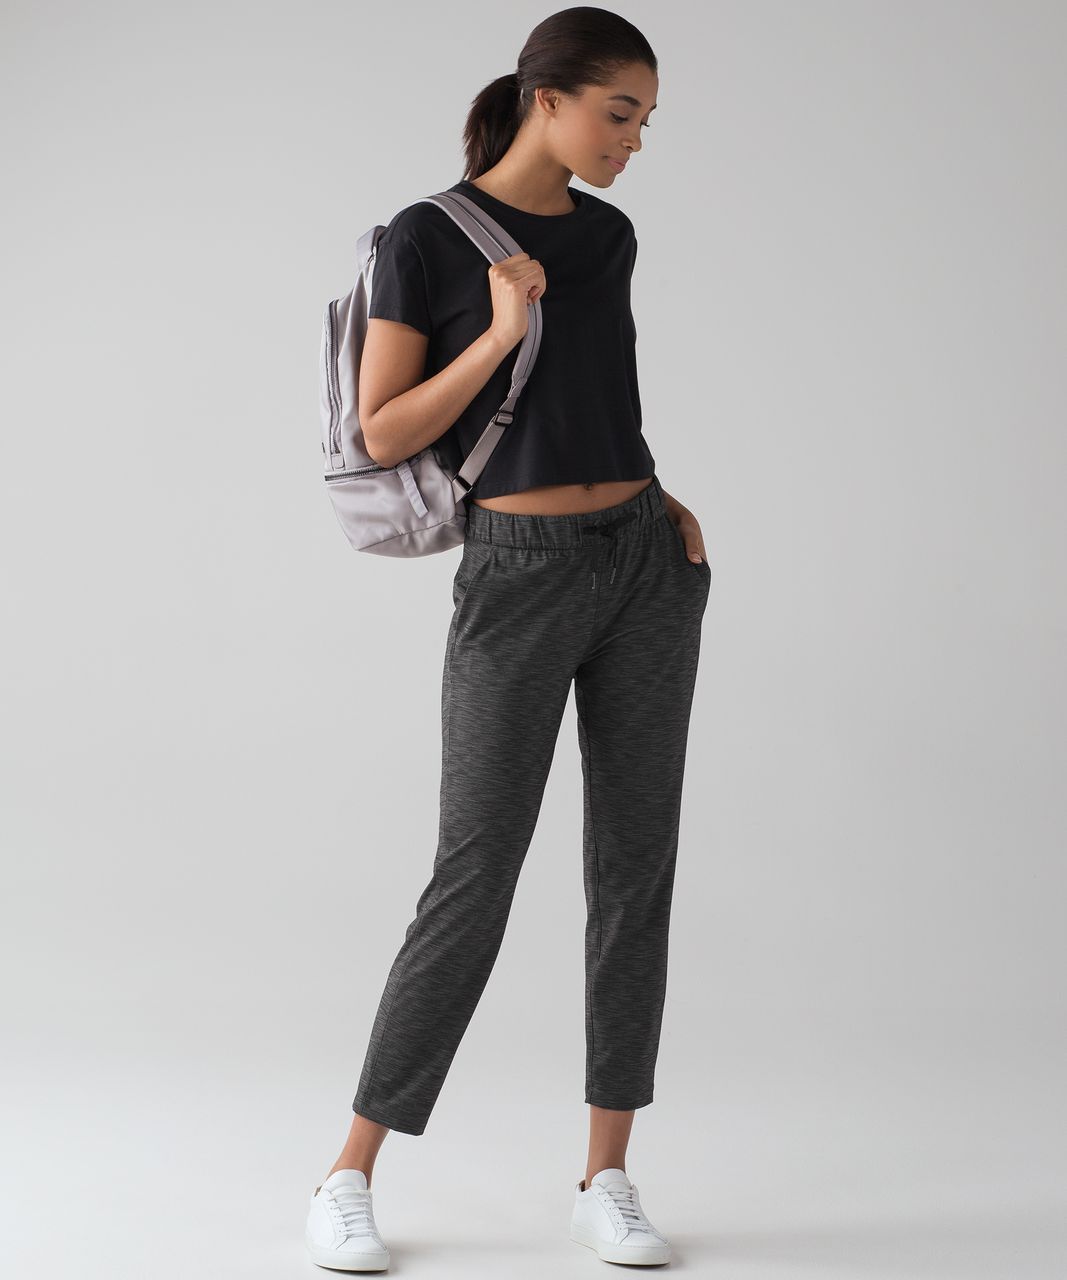 Lululemon On The Fly Pant (28") - Heathered Black (First Release)